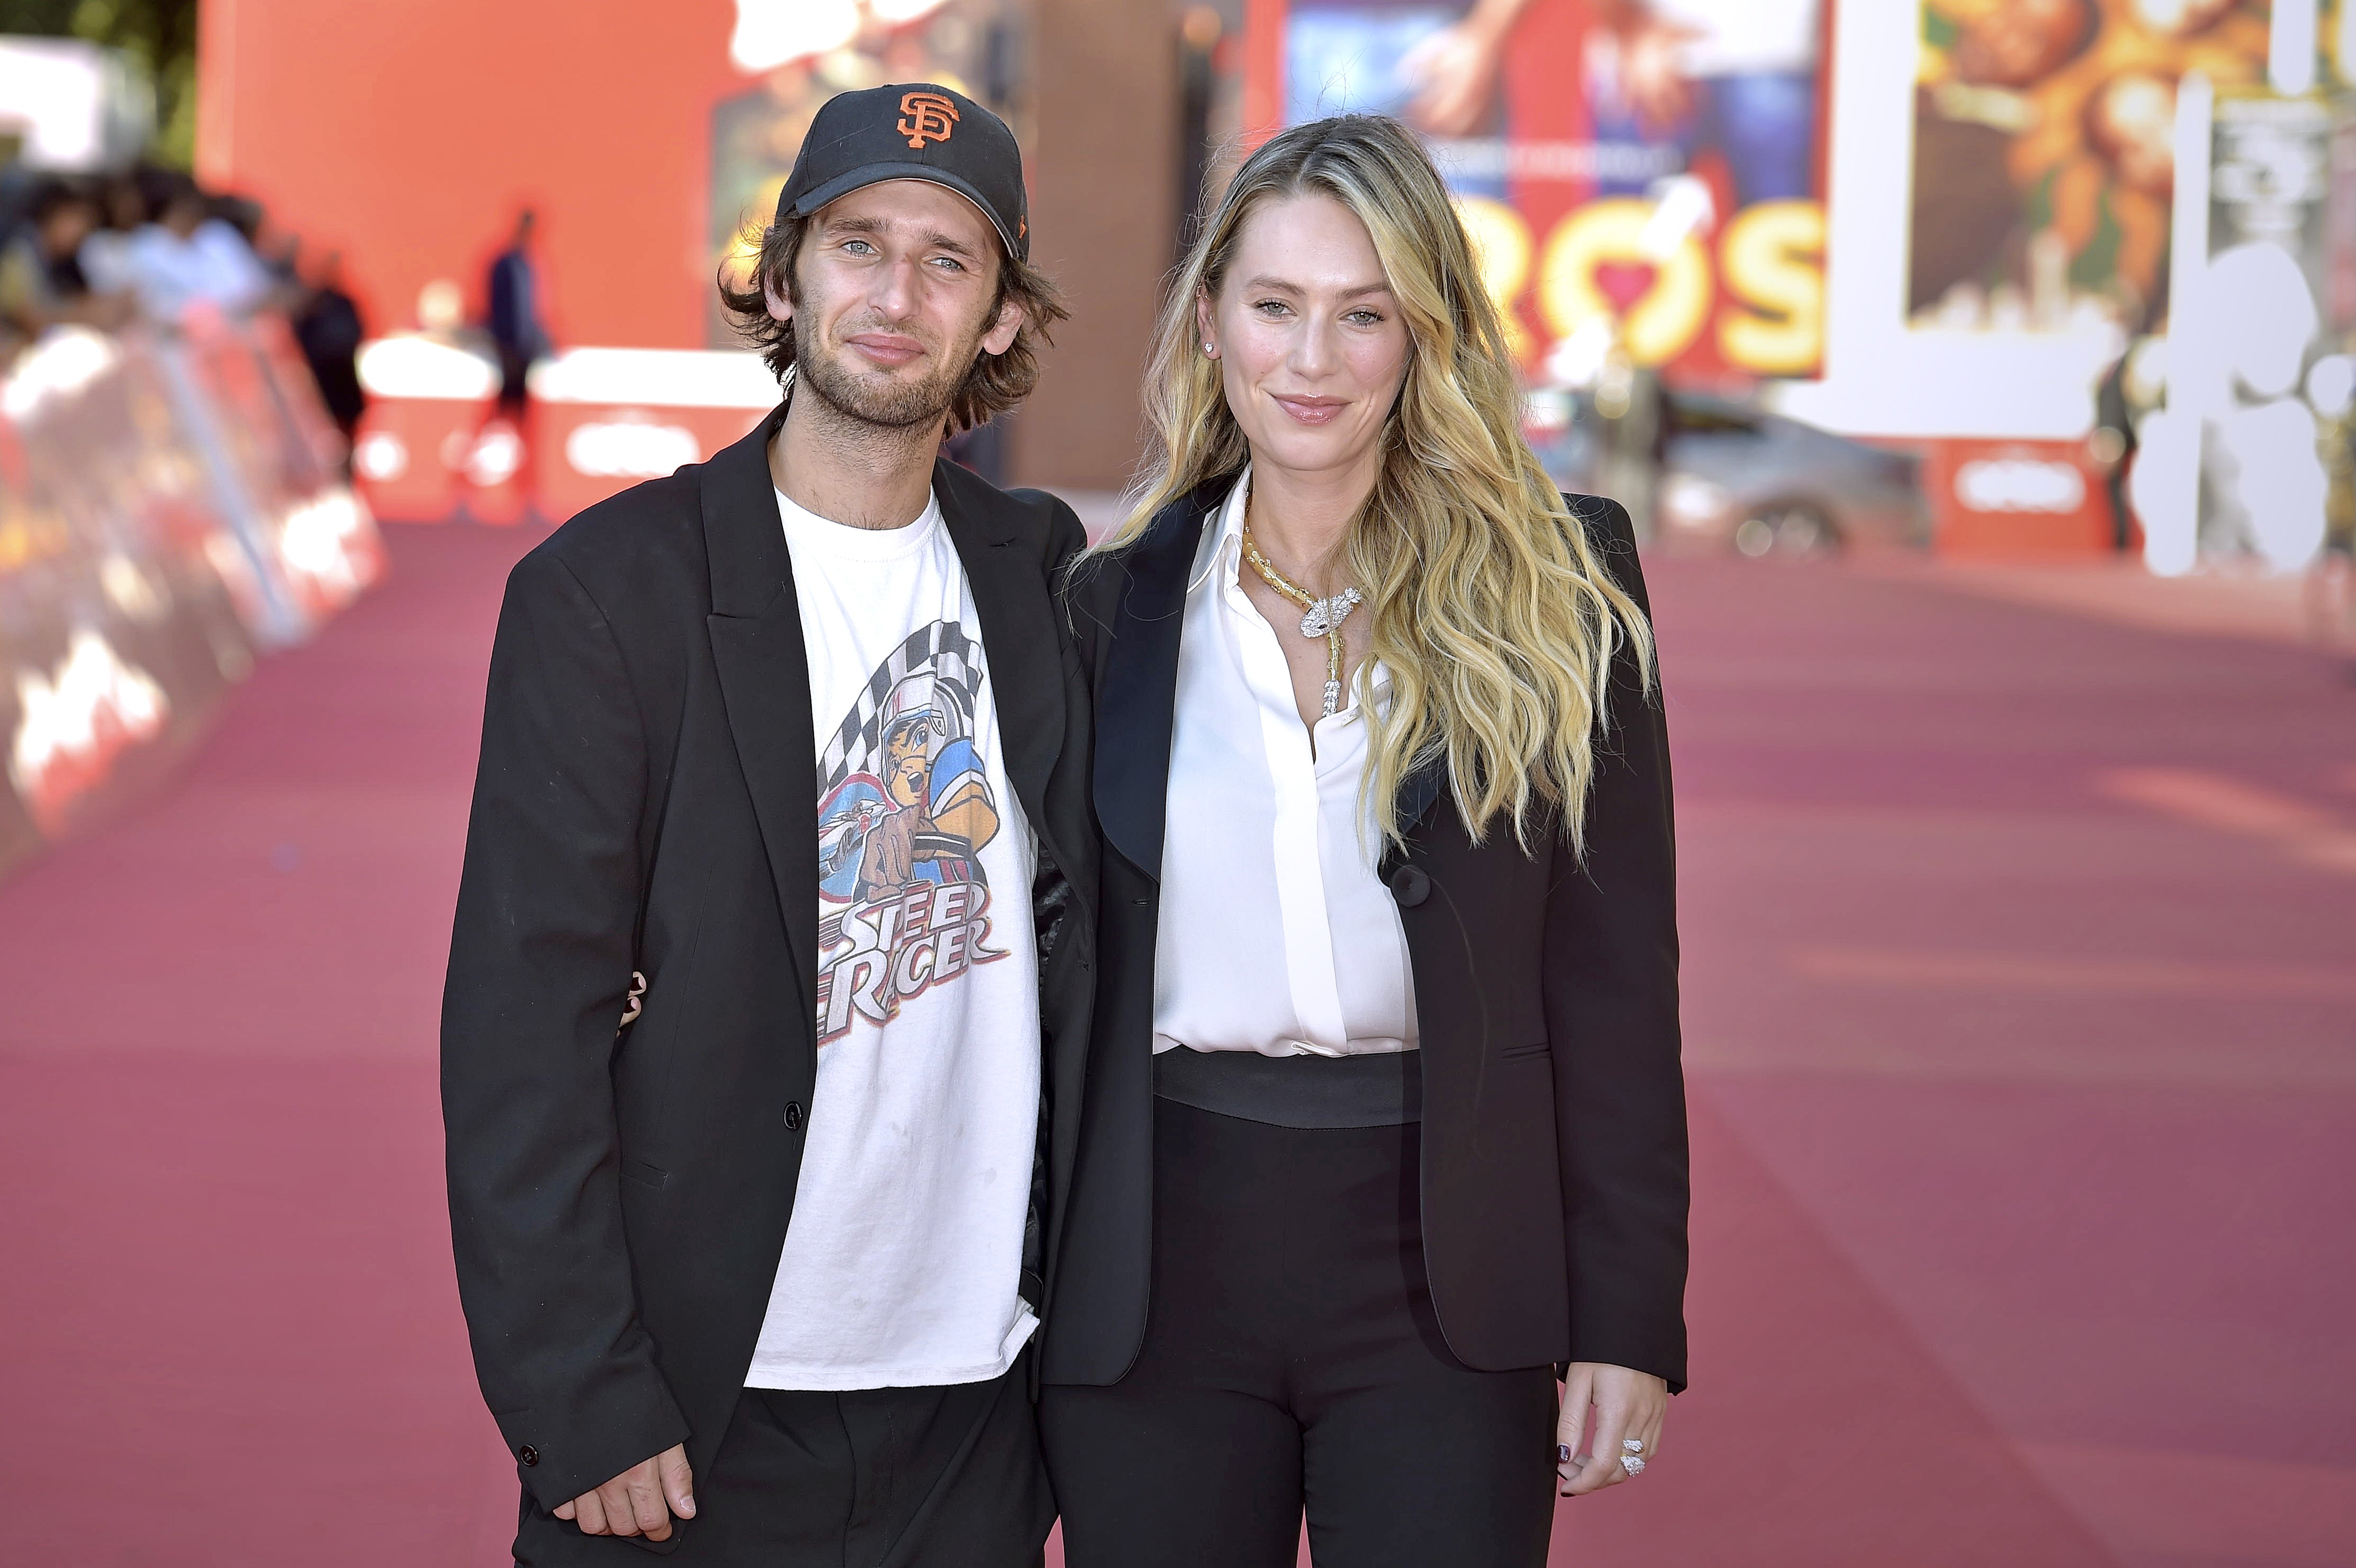 Actor Hopper Penn and his sister, actress Dylan Penn during the "Signs Of Love" Red Carpet at the Rome Film Festival on October 18, 2022 in Rome, Italy ┃Source: Getty Images